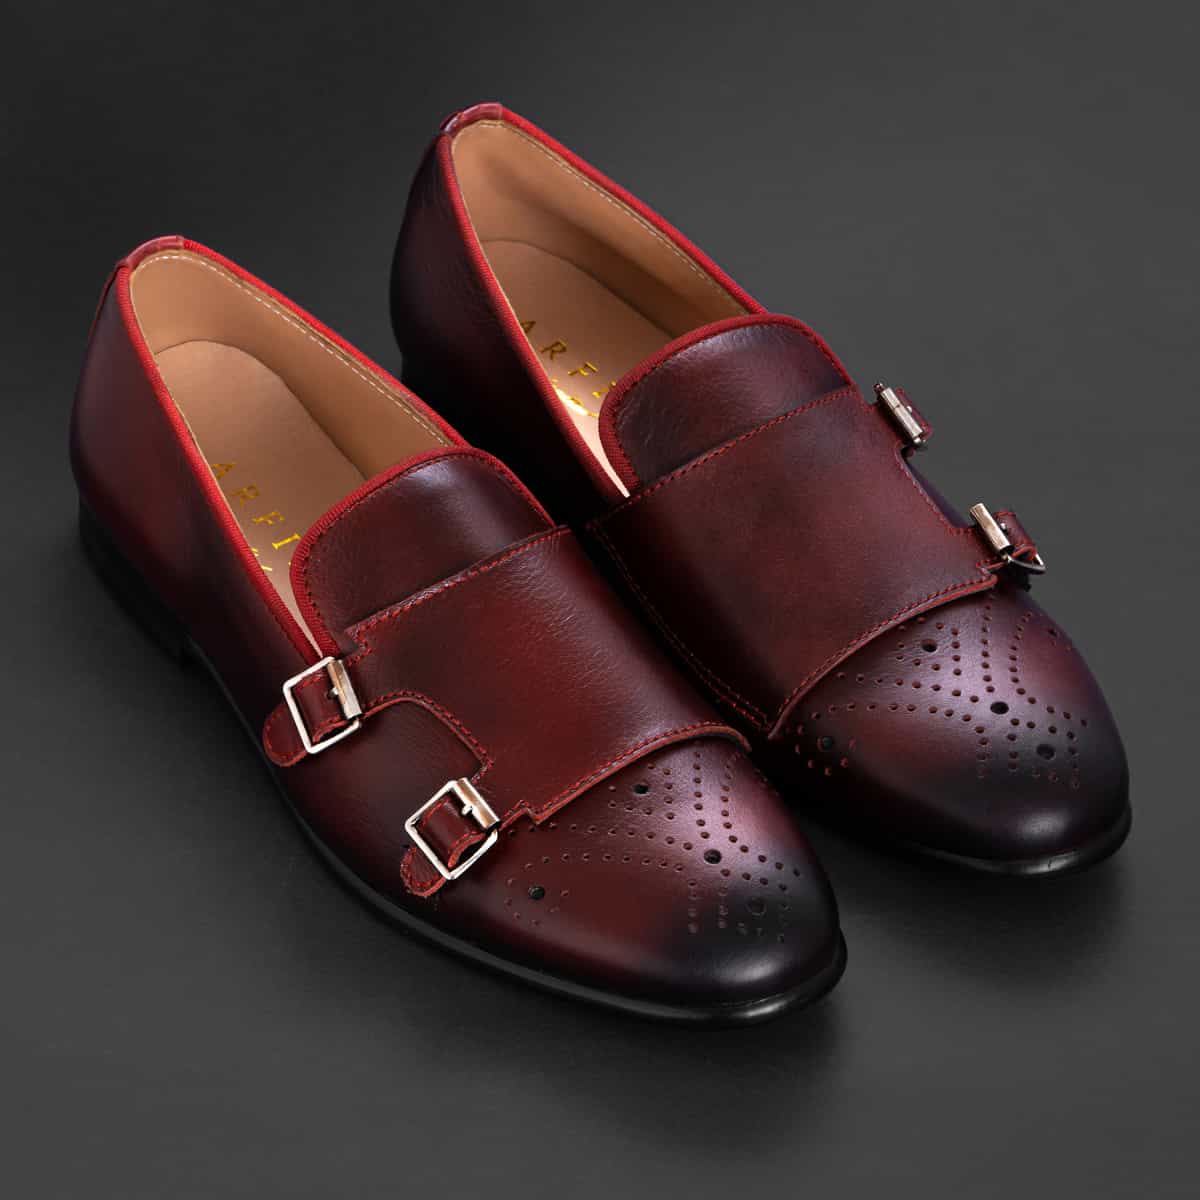 Brogue Double Monk Loafer in Burgundy Image